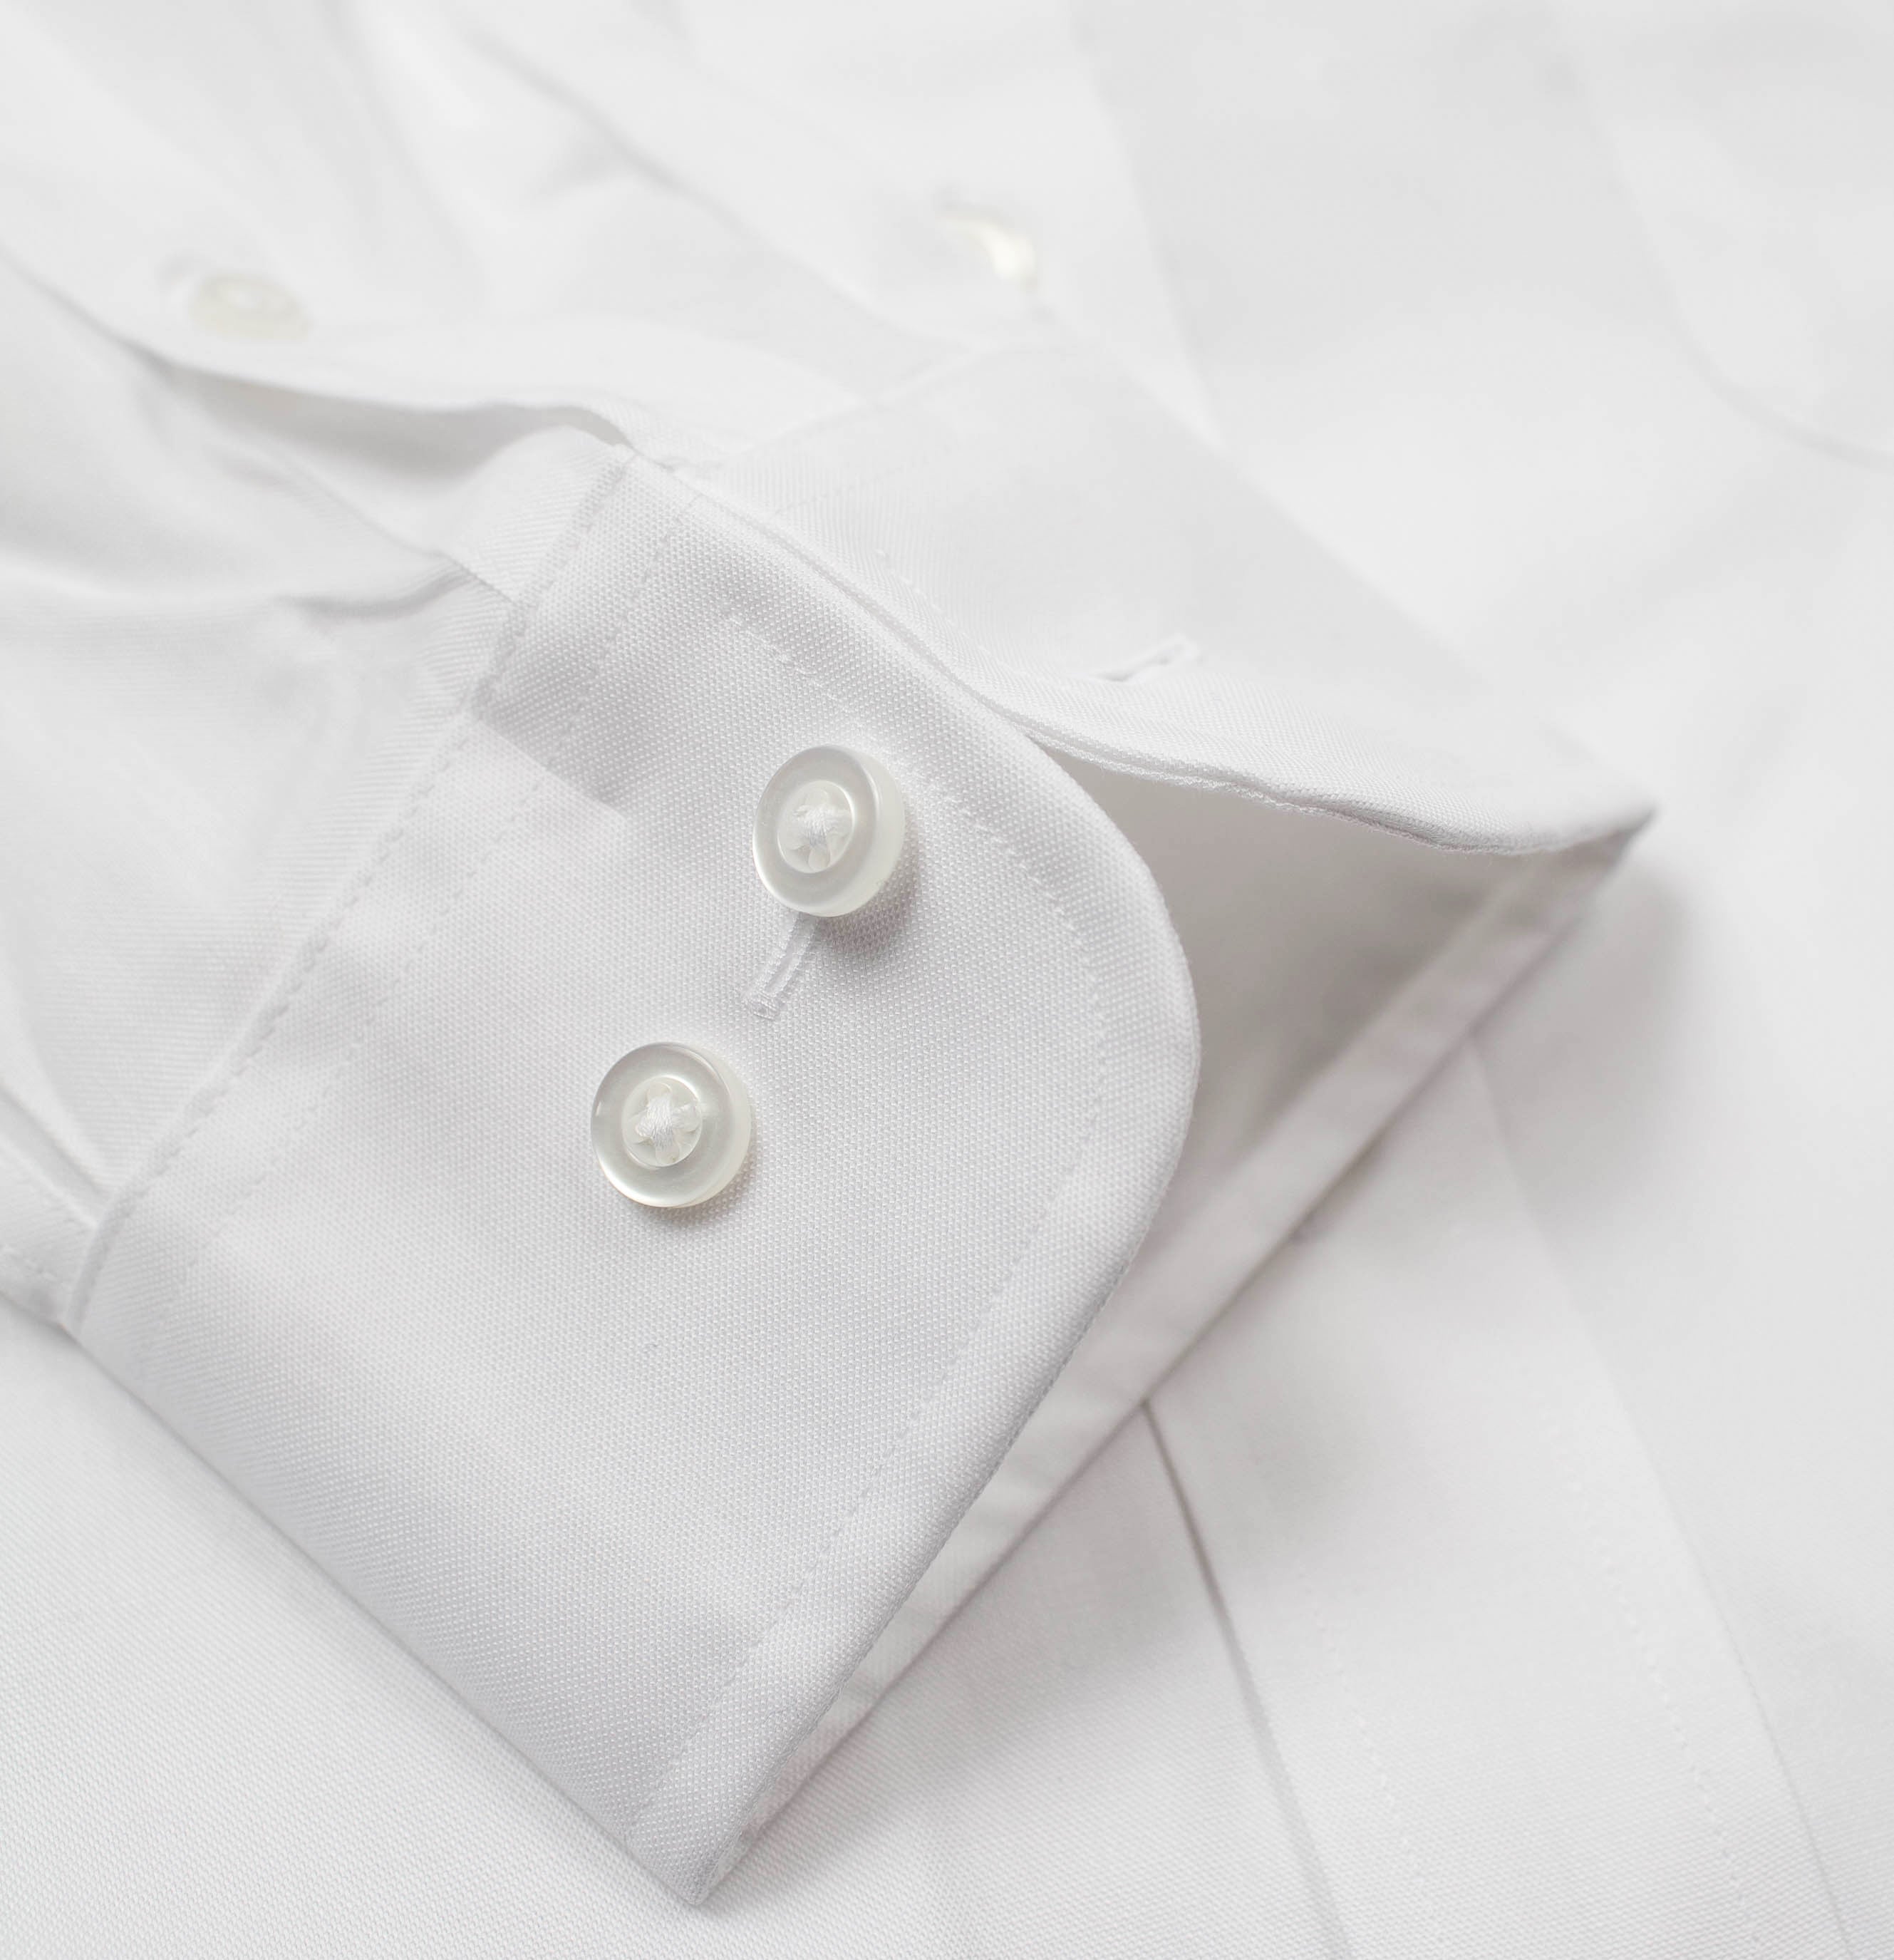 130 TF BD - Thomas Dylan White Tailored Fit Button Down Collar